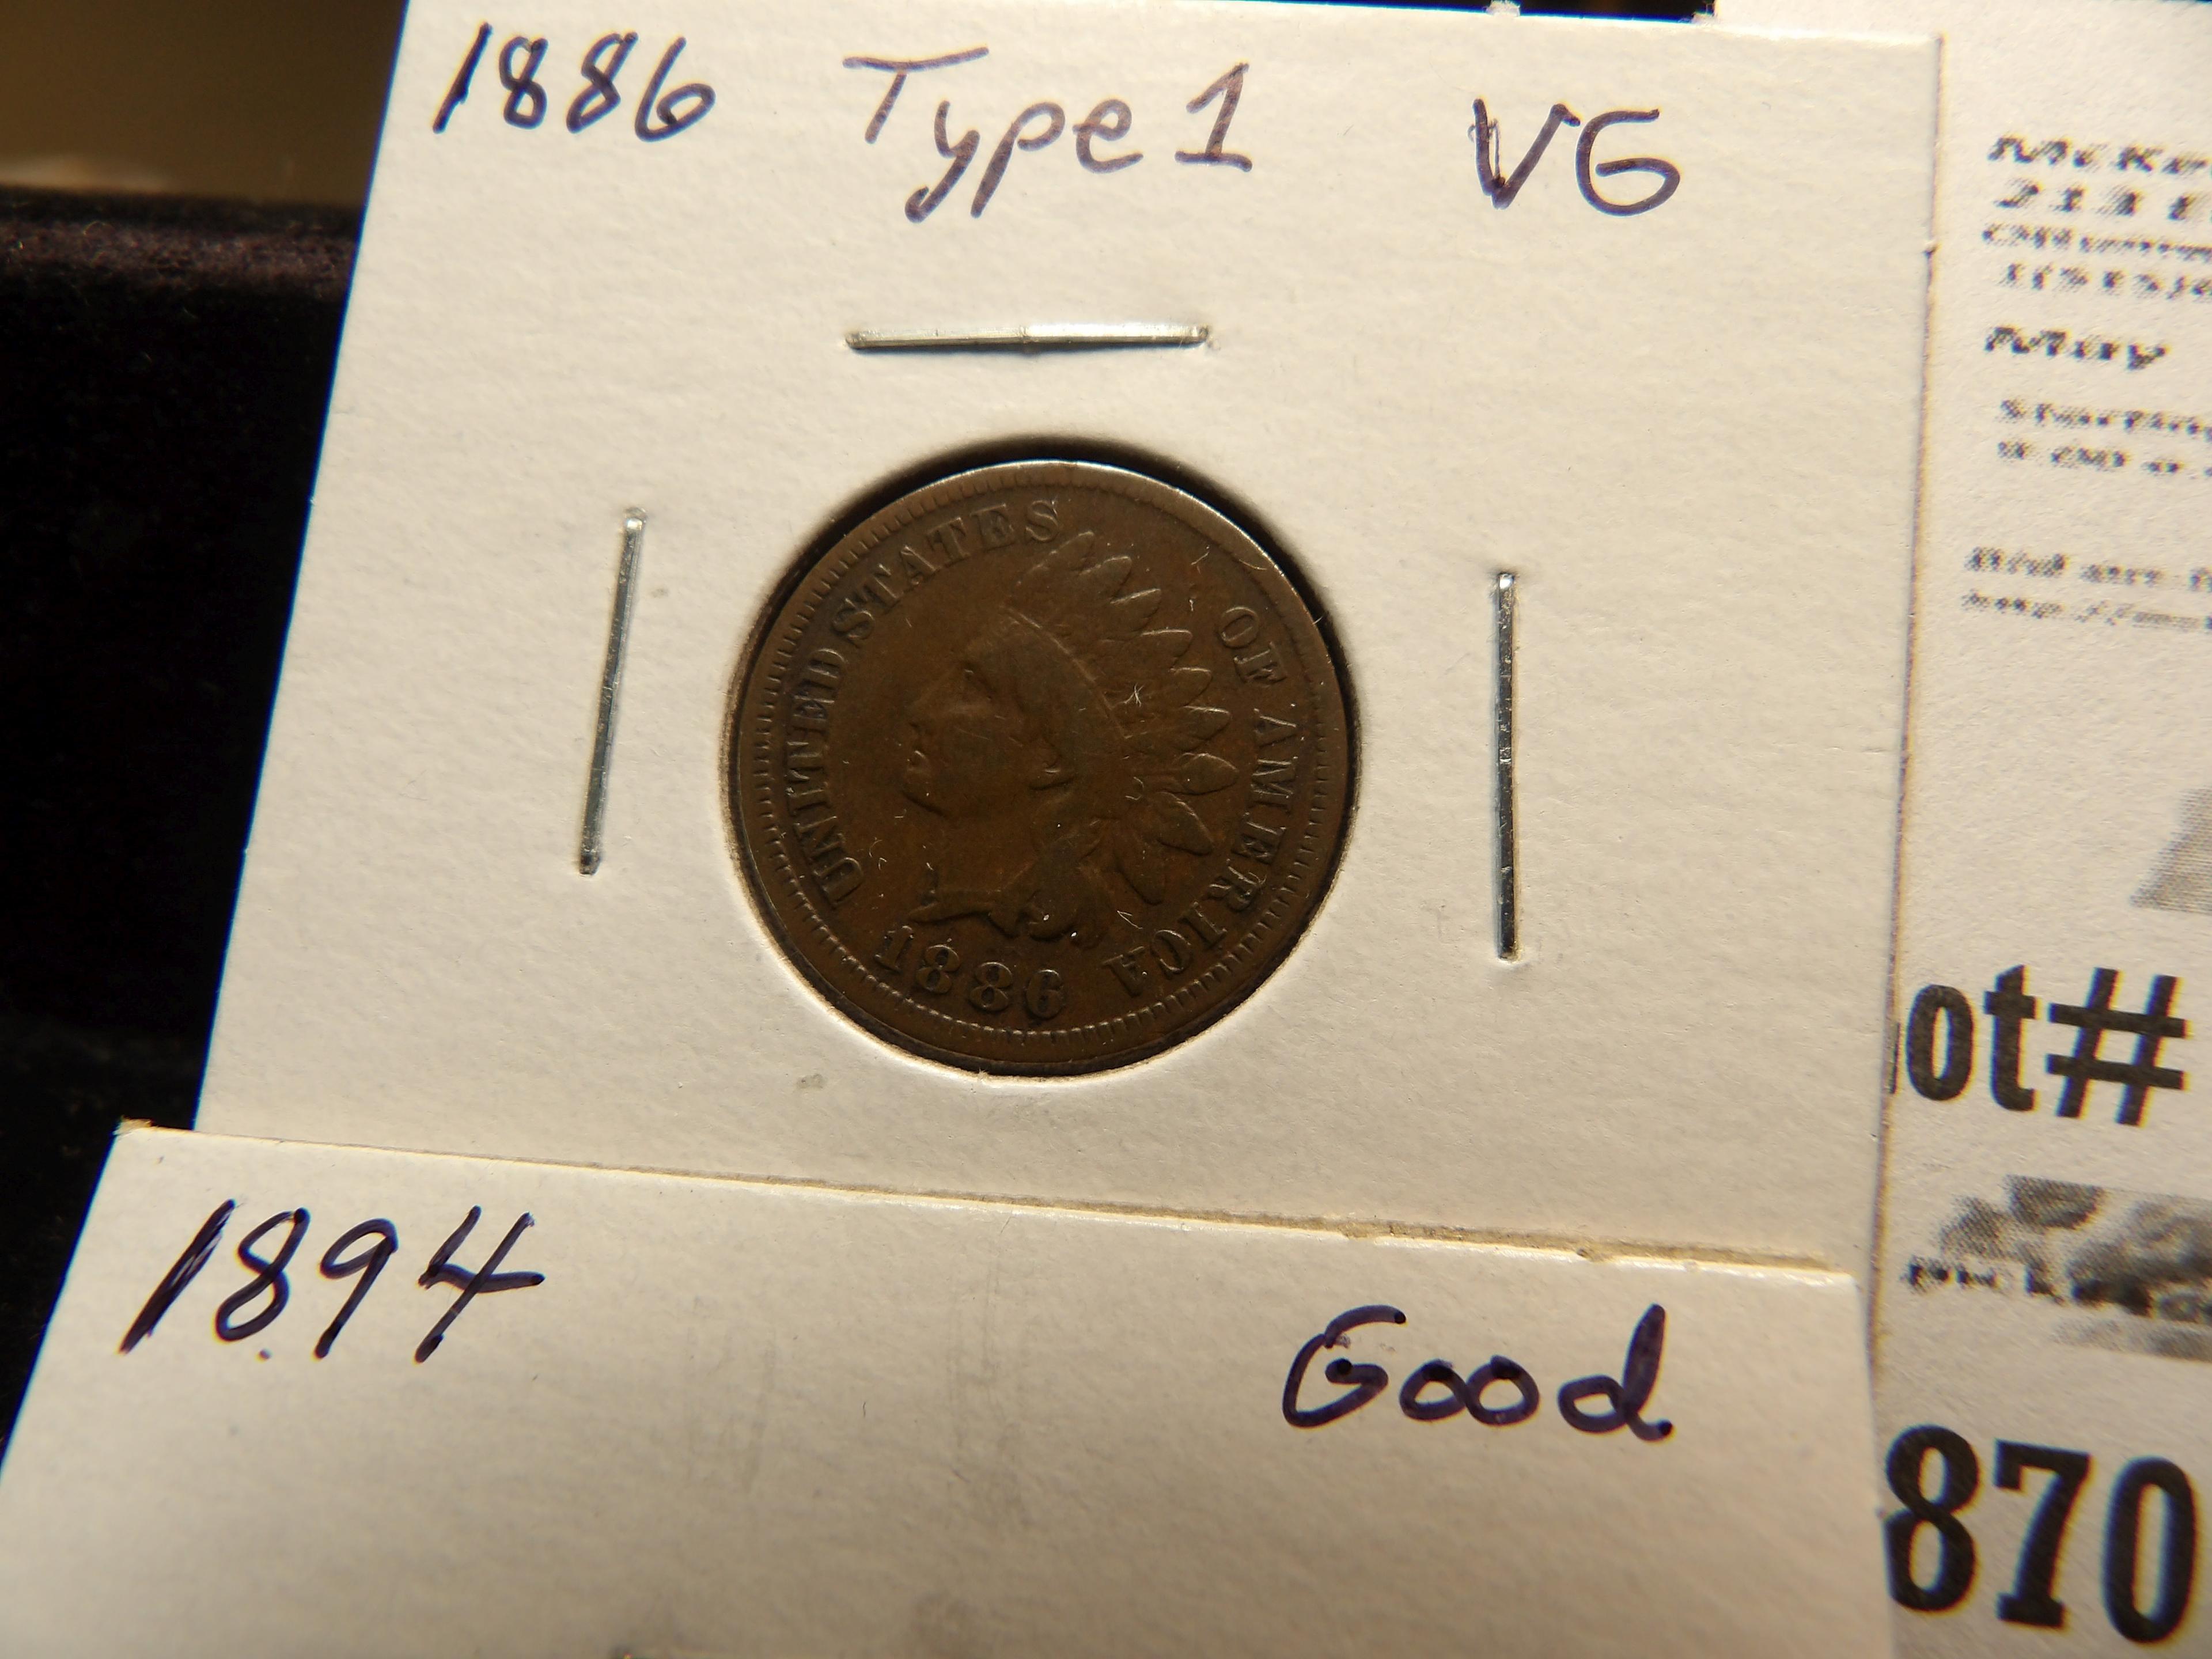 1883 EF, 1886 Type One VG, 1886 Type 2 Good, and 1894 Good Indian Head Cents.